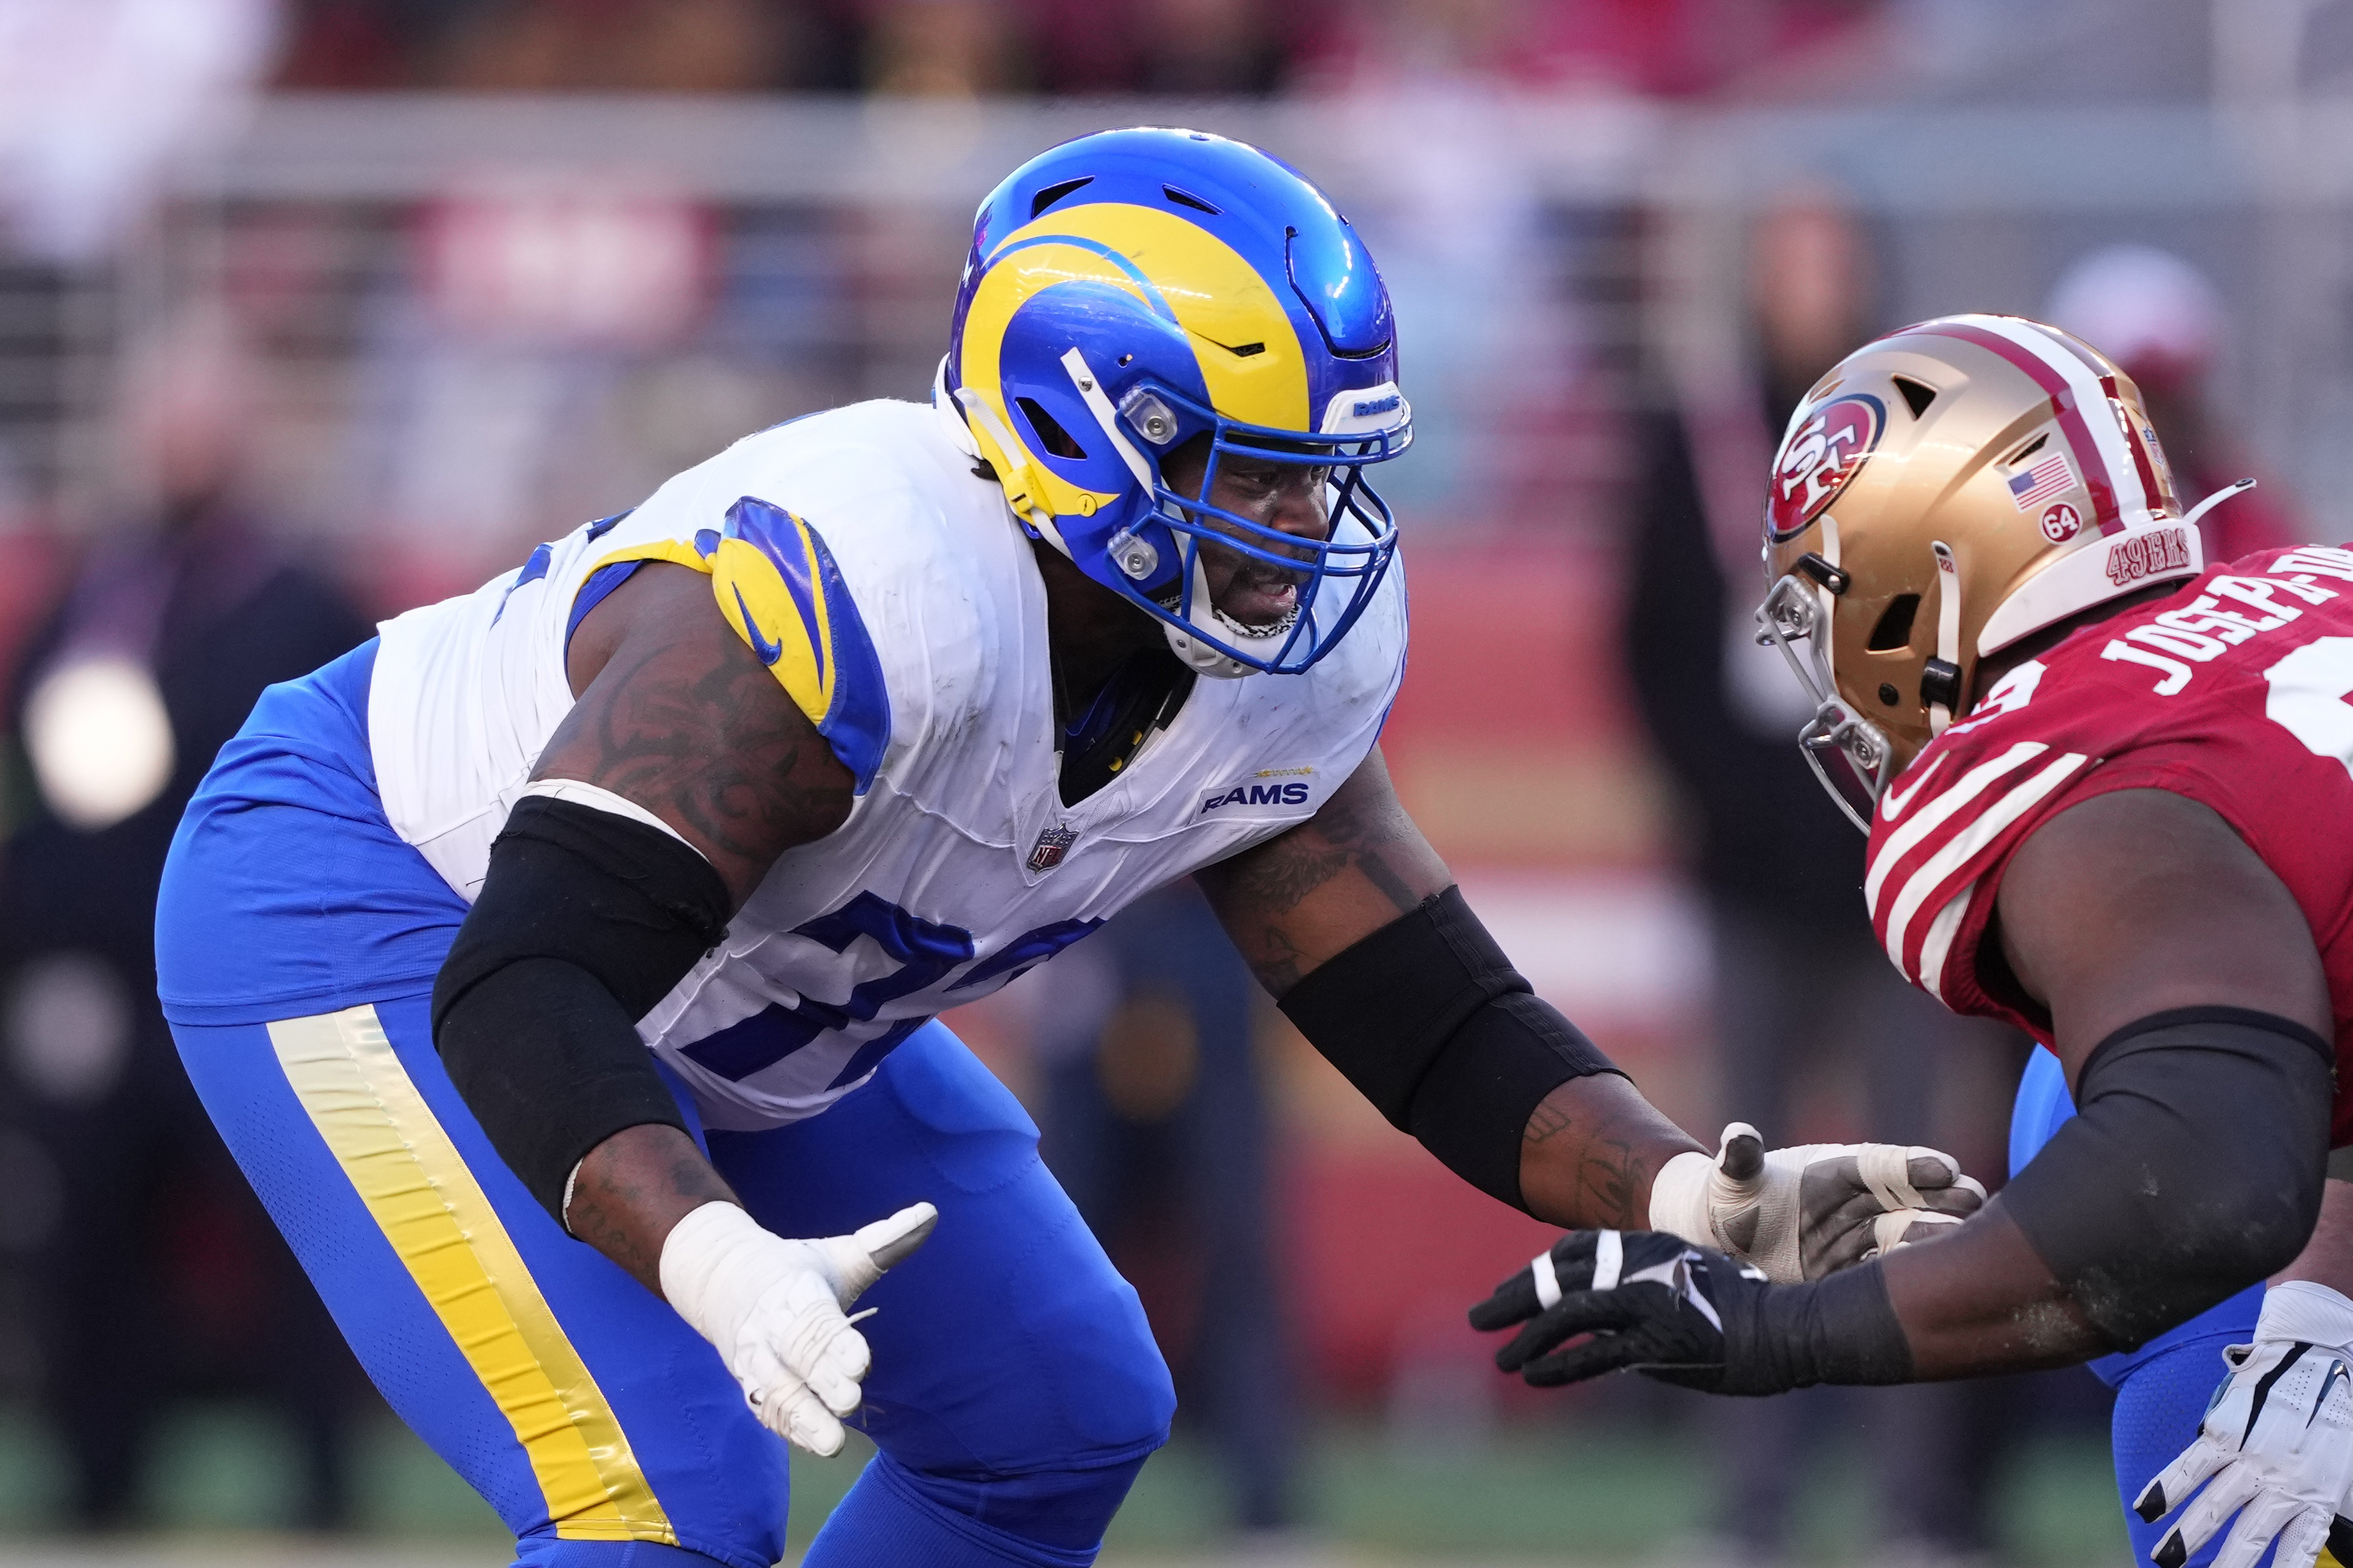 Anchrum saw extended snaps in two games against the 49ers last season, giving up two pressures and a sack on 52 pass blocking reps for the Rams.